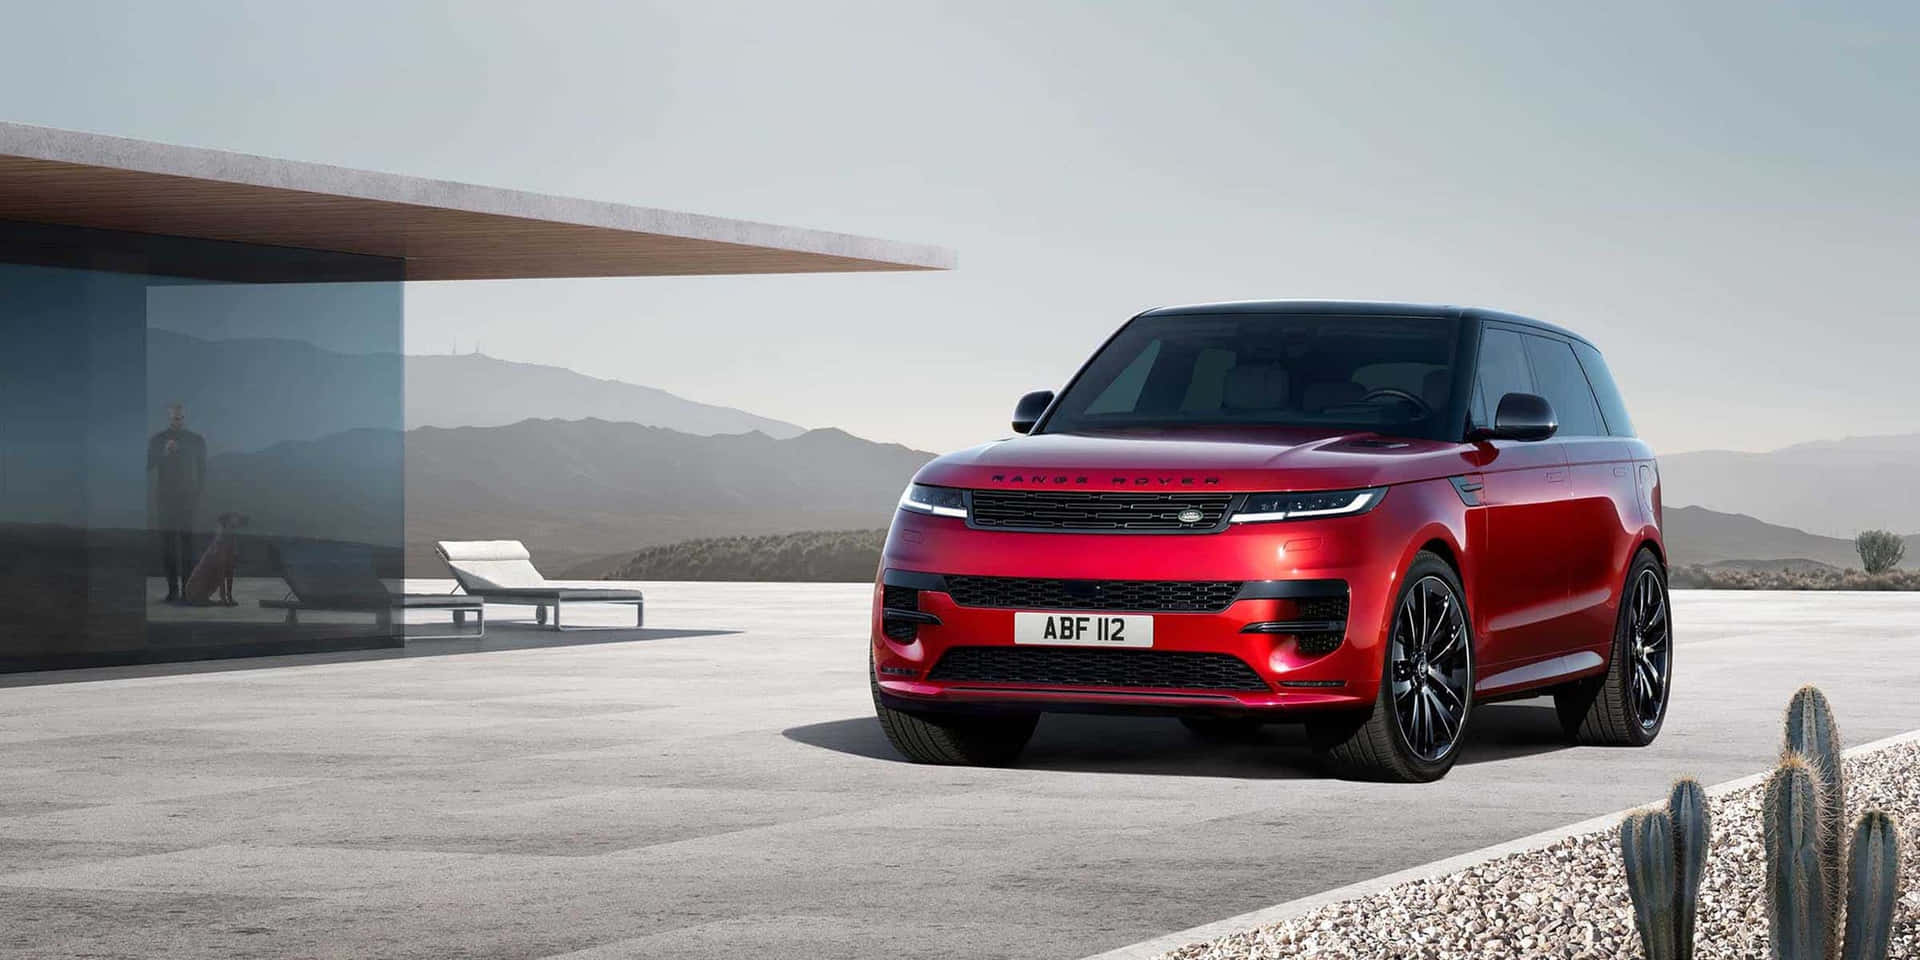 Conquer any terrain with the unbeatable Range Rover